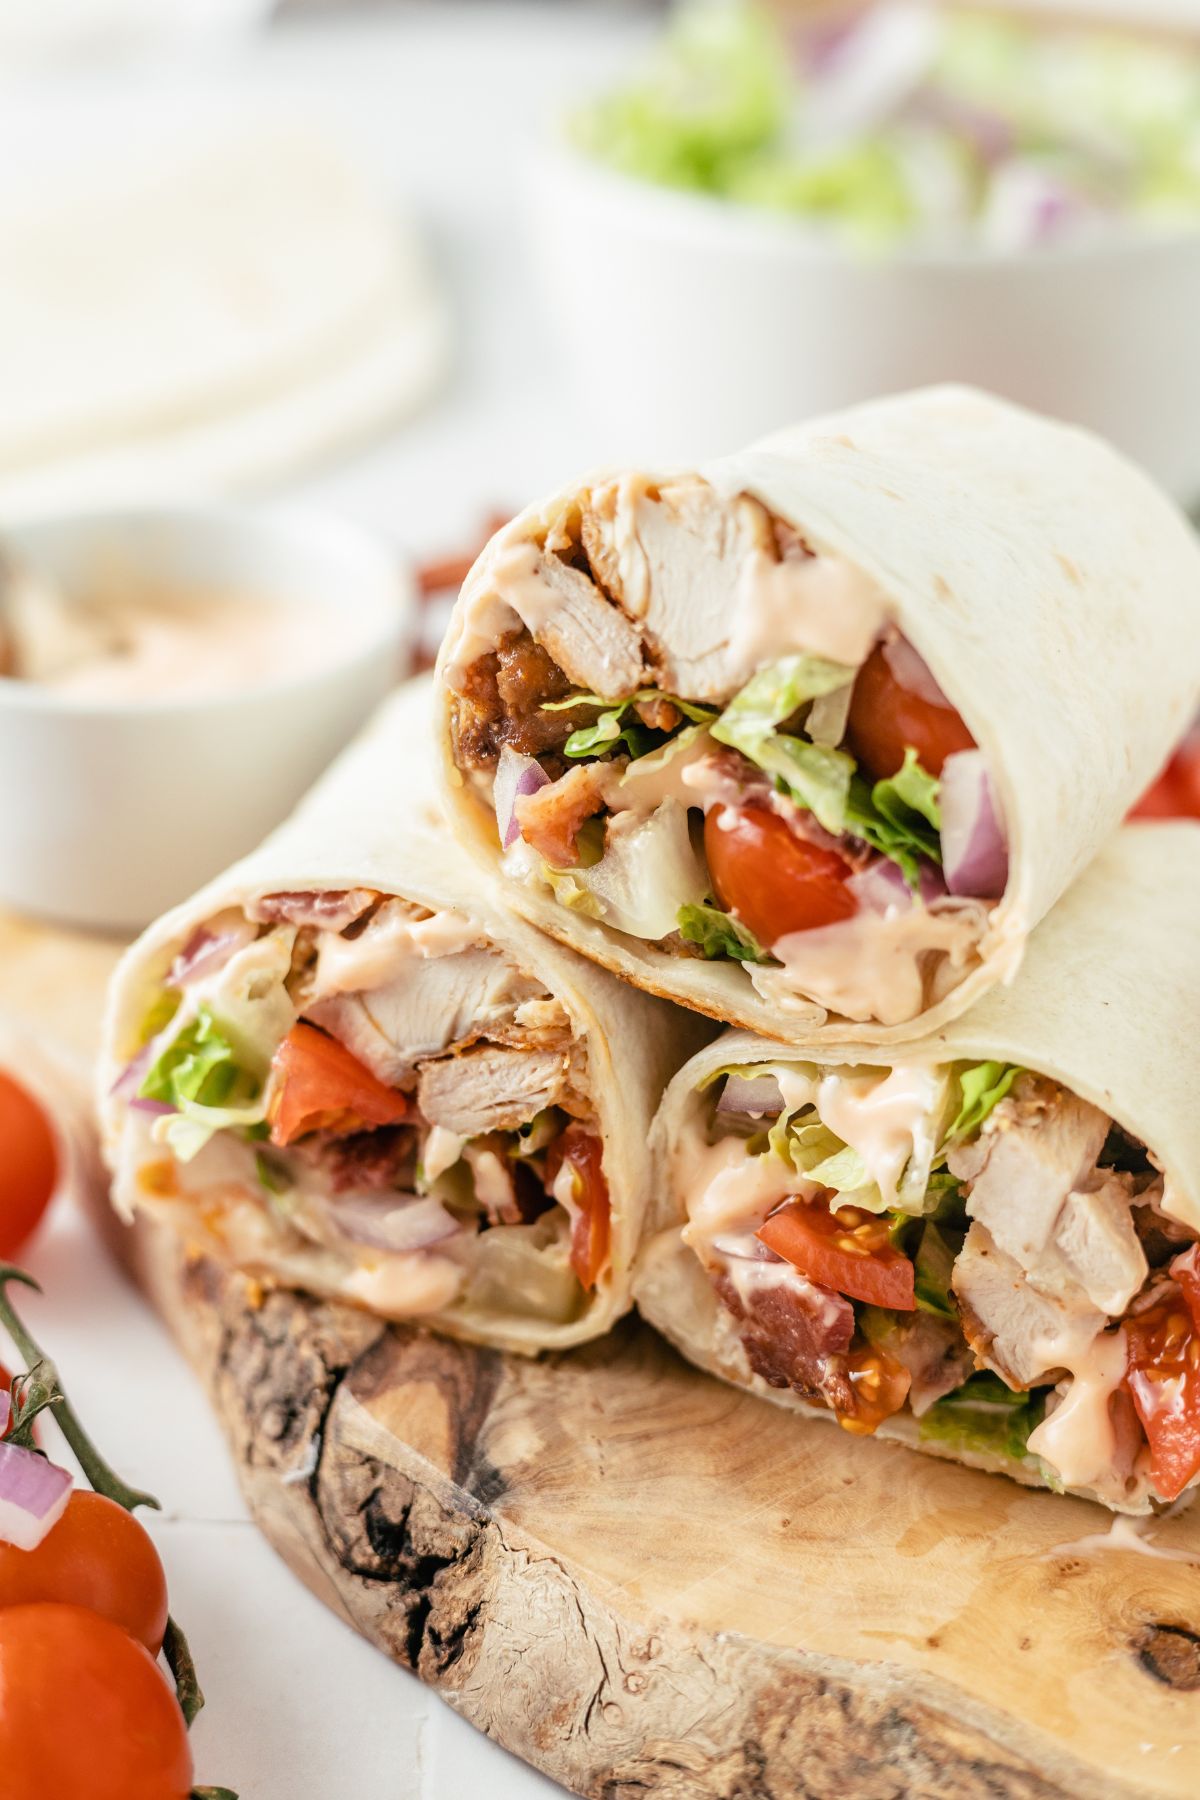 Three tempting Cajun Chicken Wraps on a rustic wooden board.